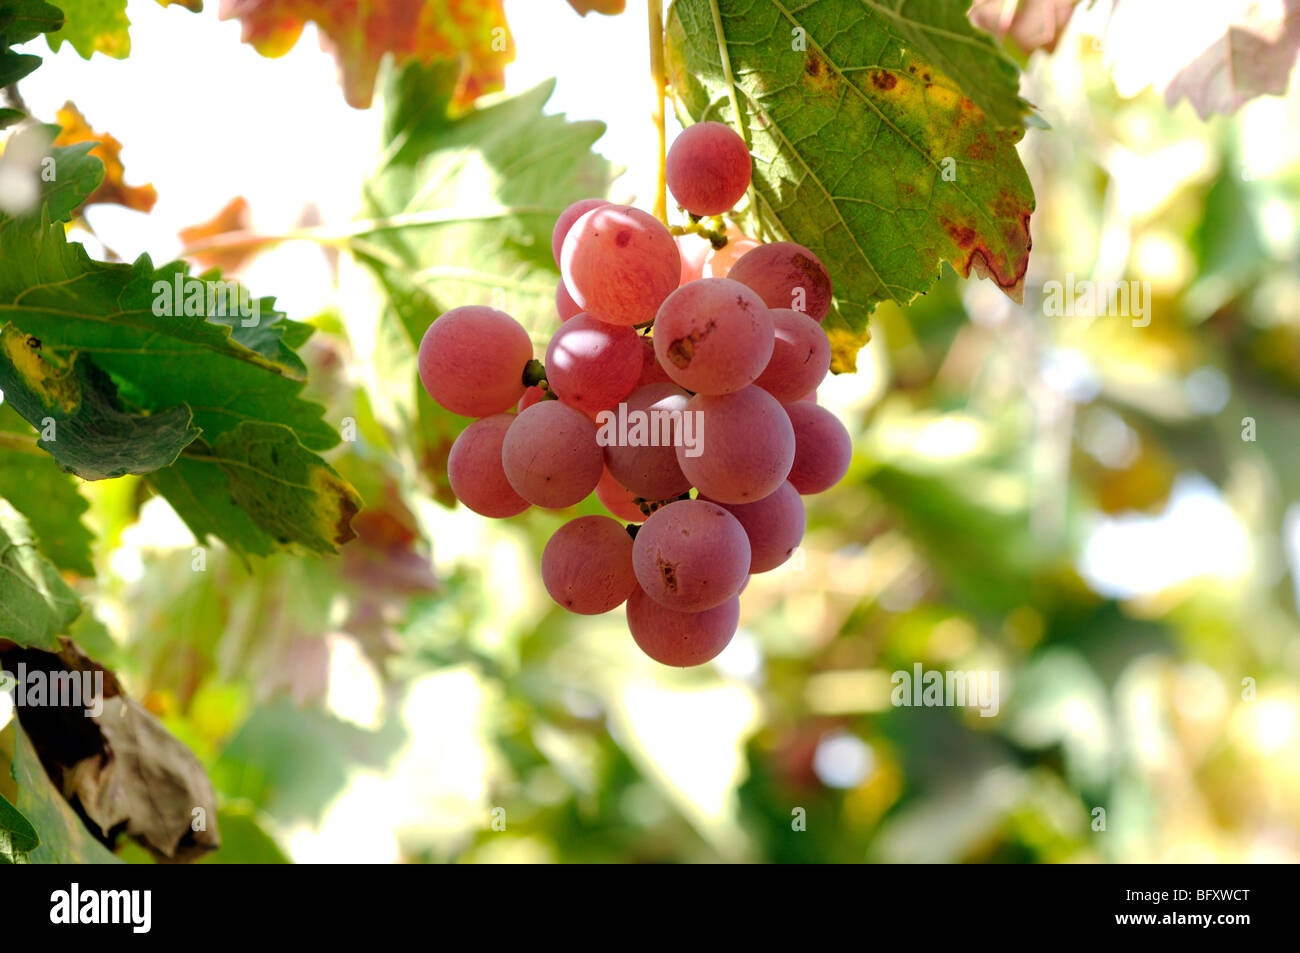 Israel, Negev, Lachish Region, Vineyard, Close up of a cluster of ripe grapes Stock Photo